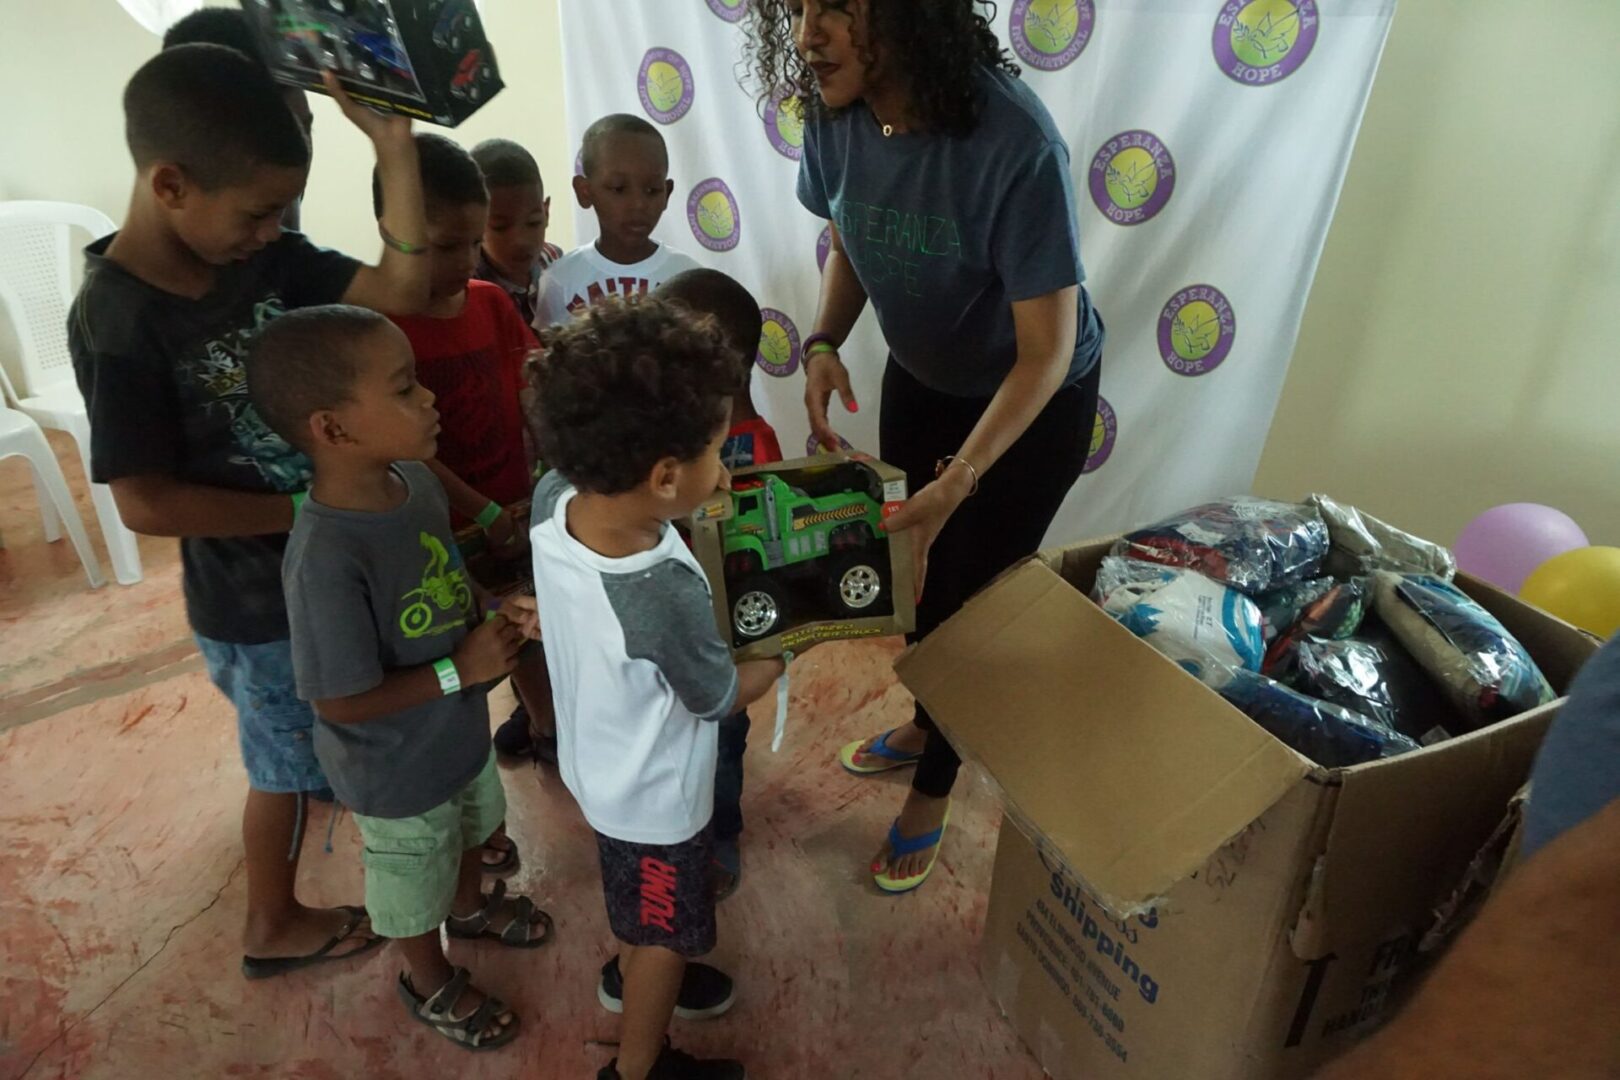 Boys line up to receive toys from our staff, different view